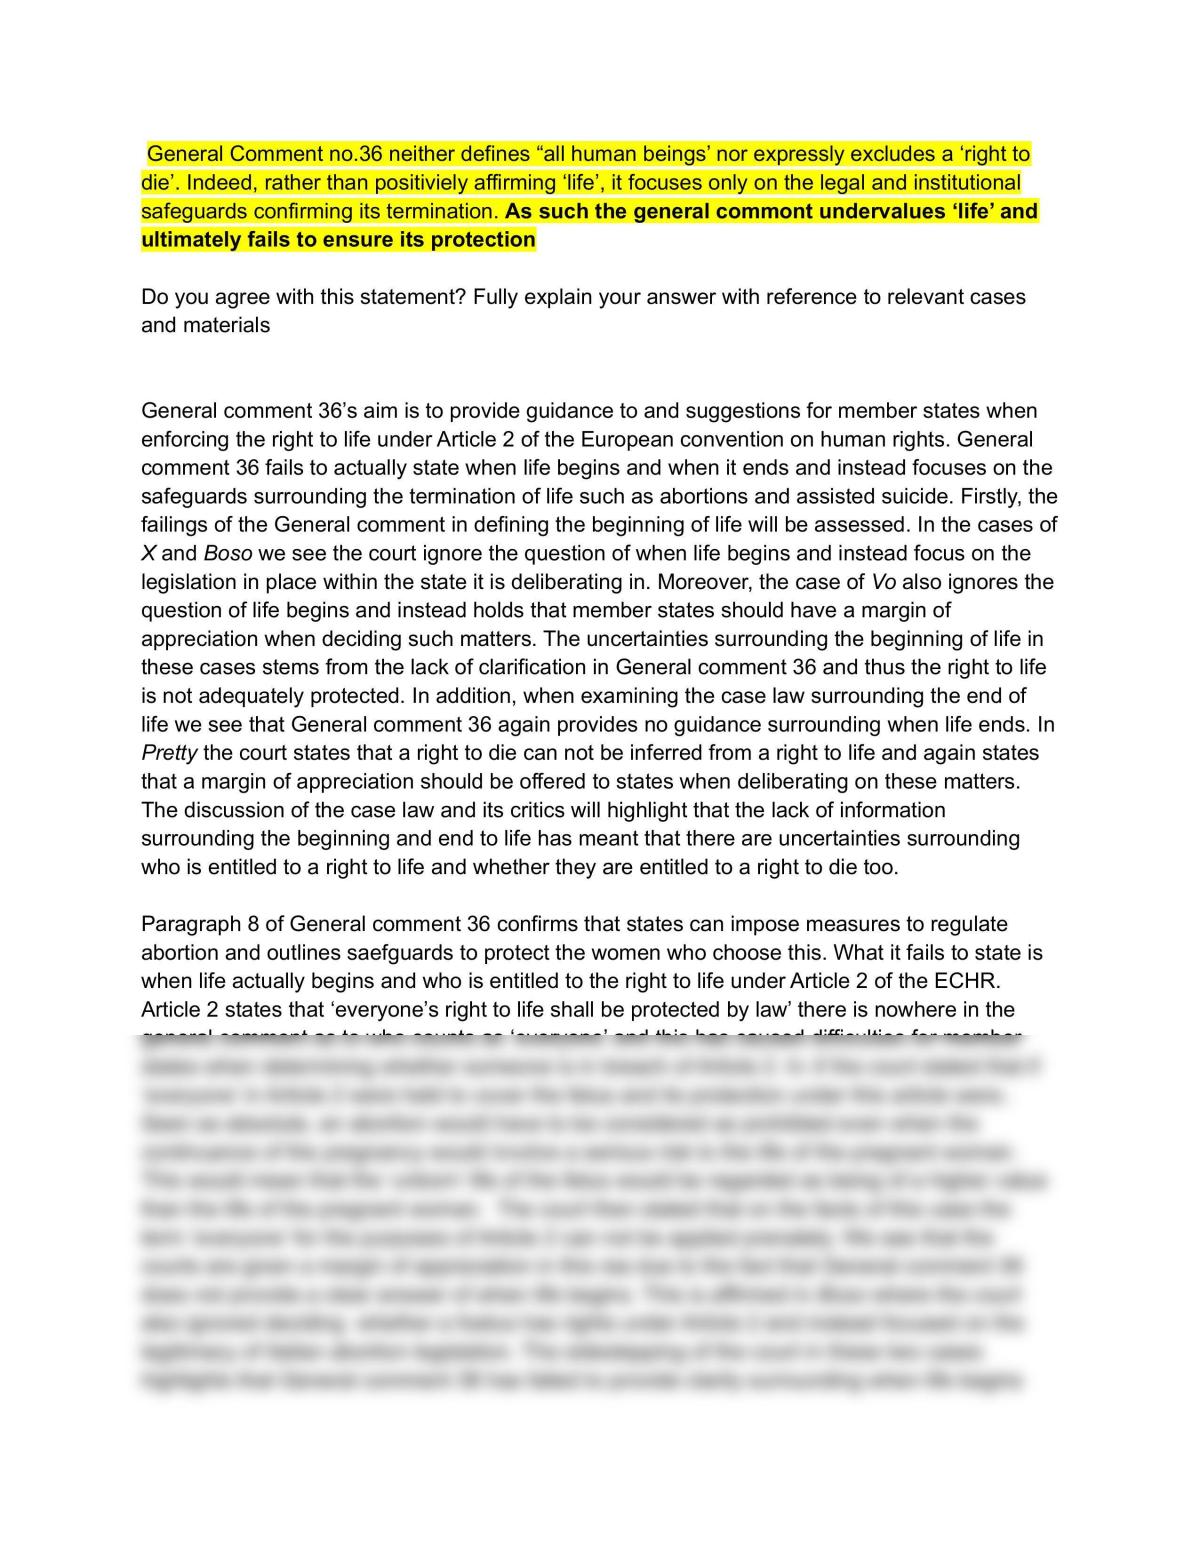 Essay on General comment 36 and whether it provides guidance on the right to life and the right to die. - Page 1